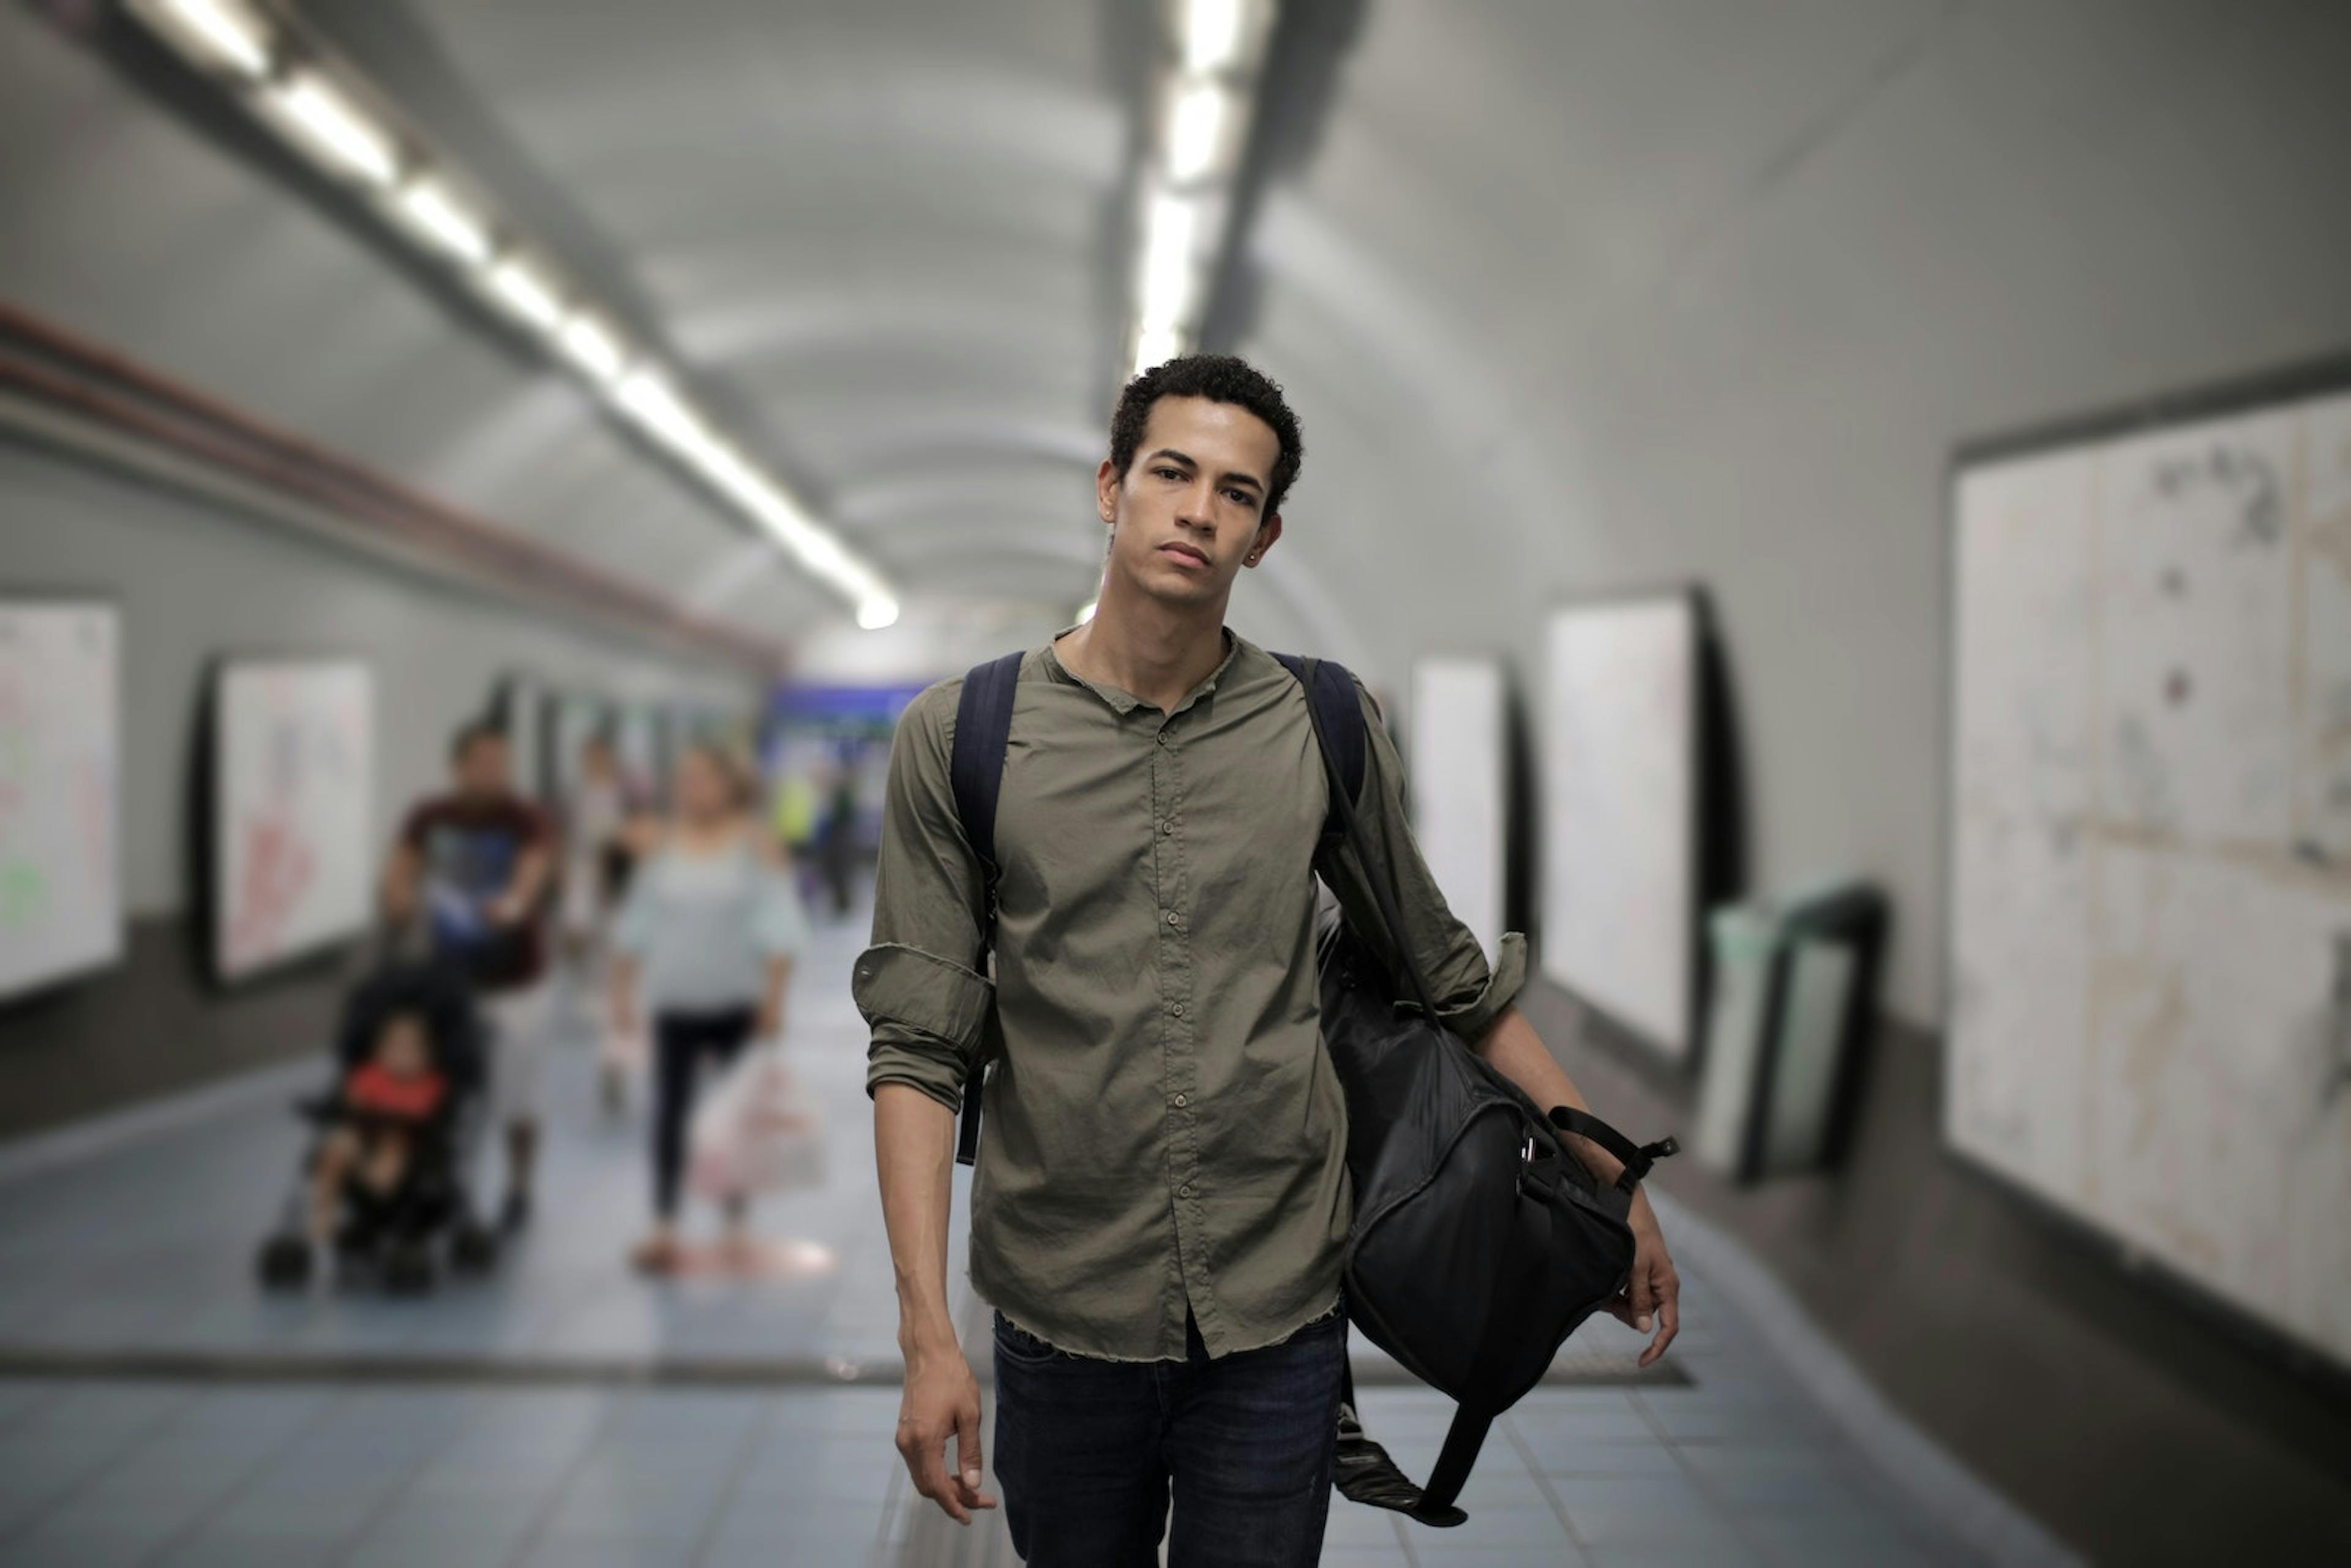 a young, sad looking man walks through a subway tunned while carrying a duffel bag